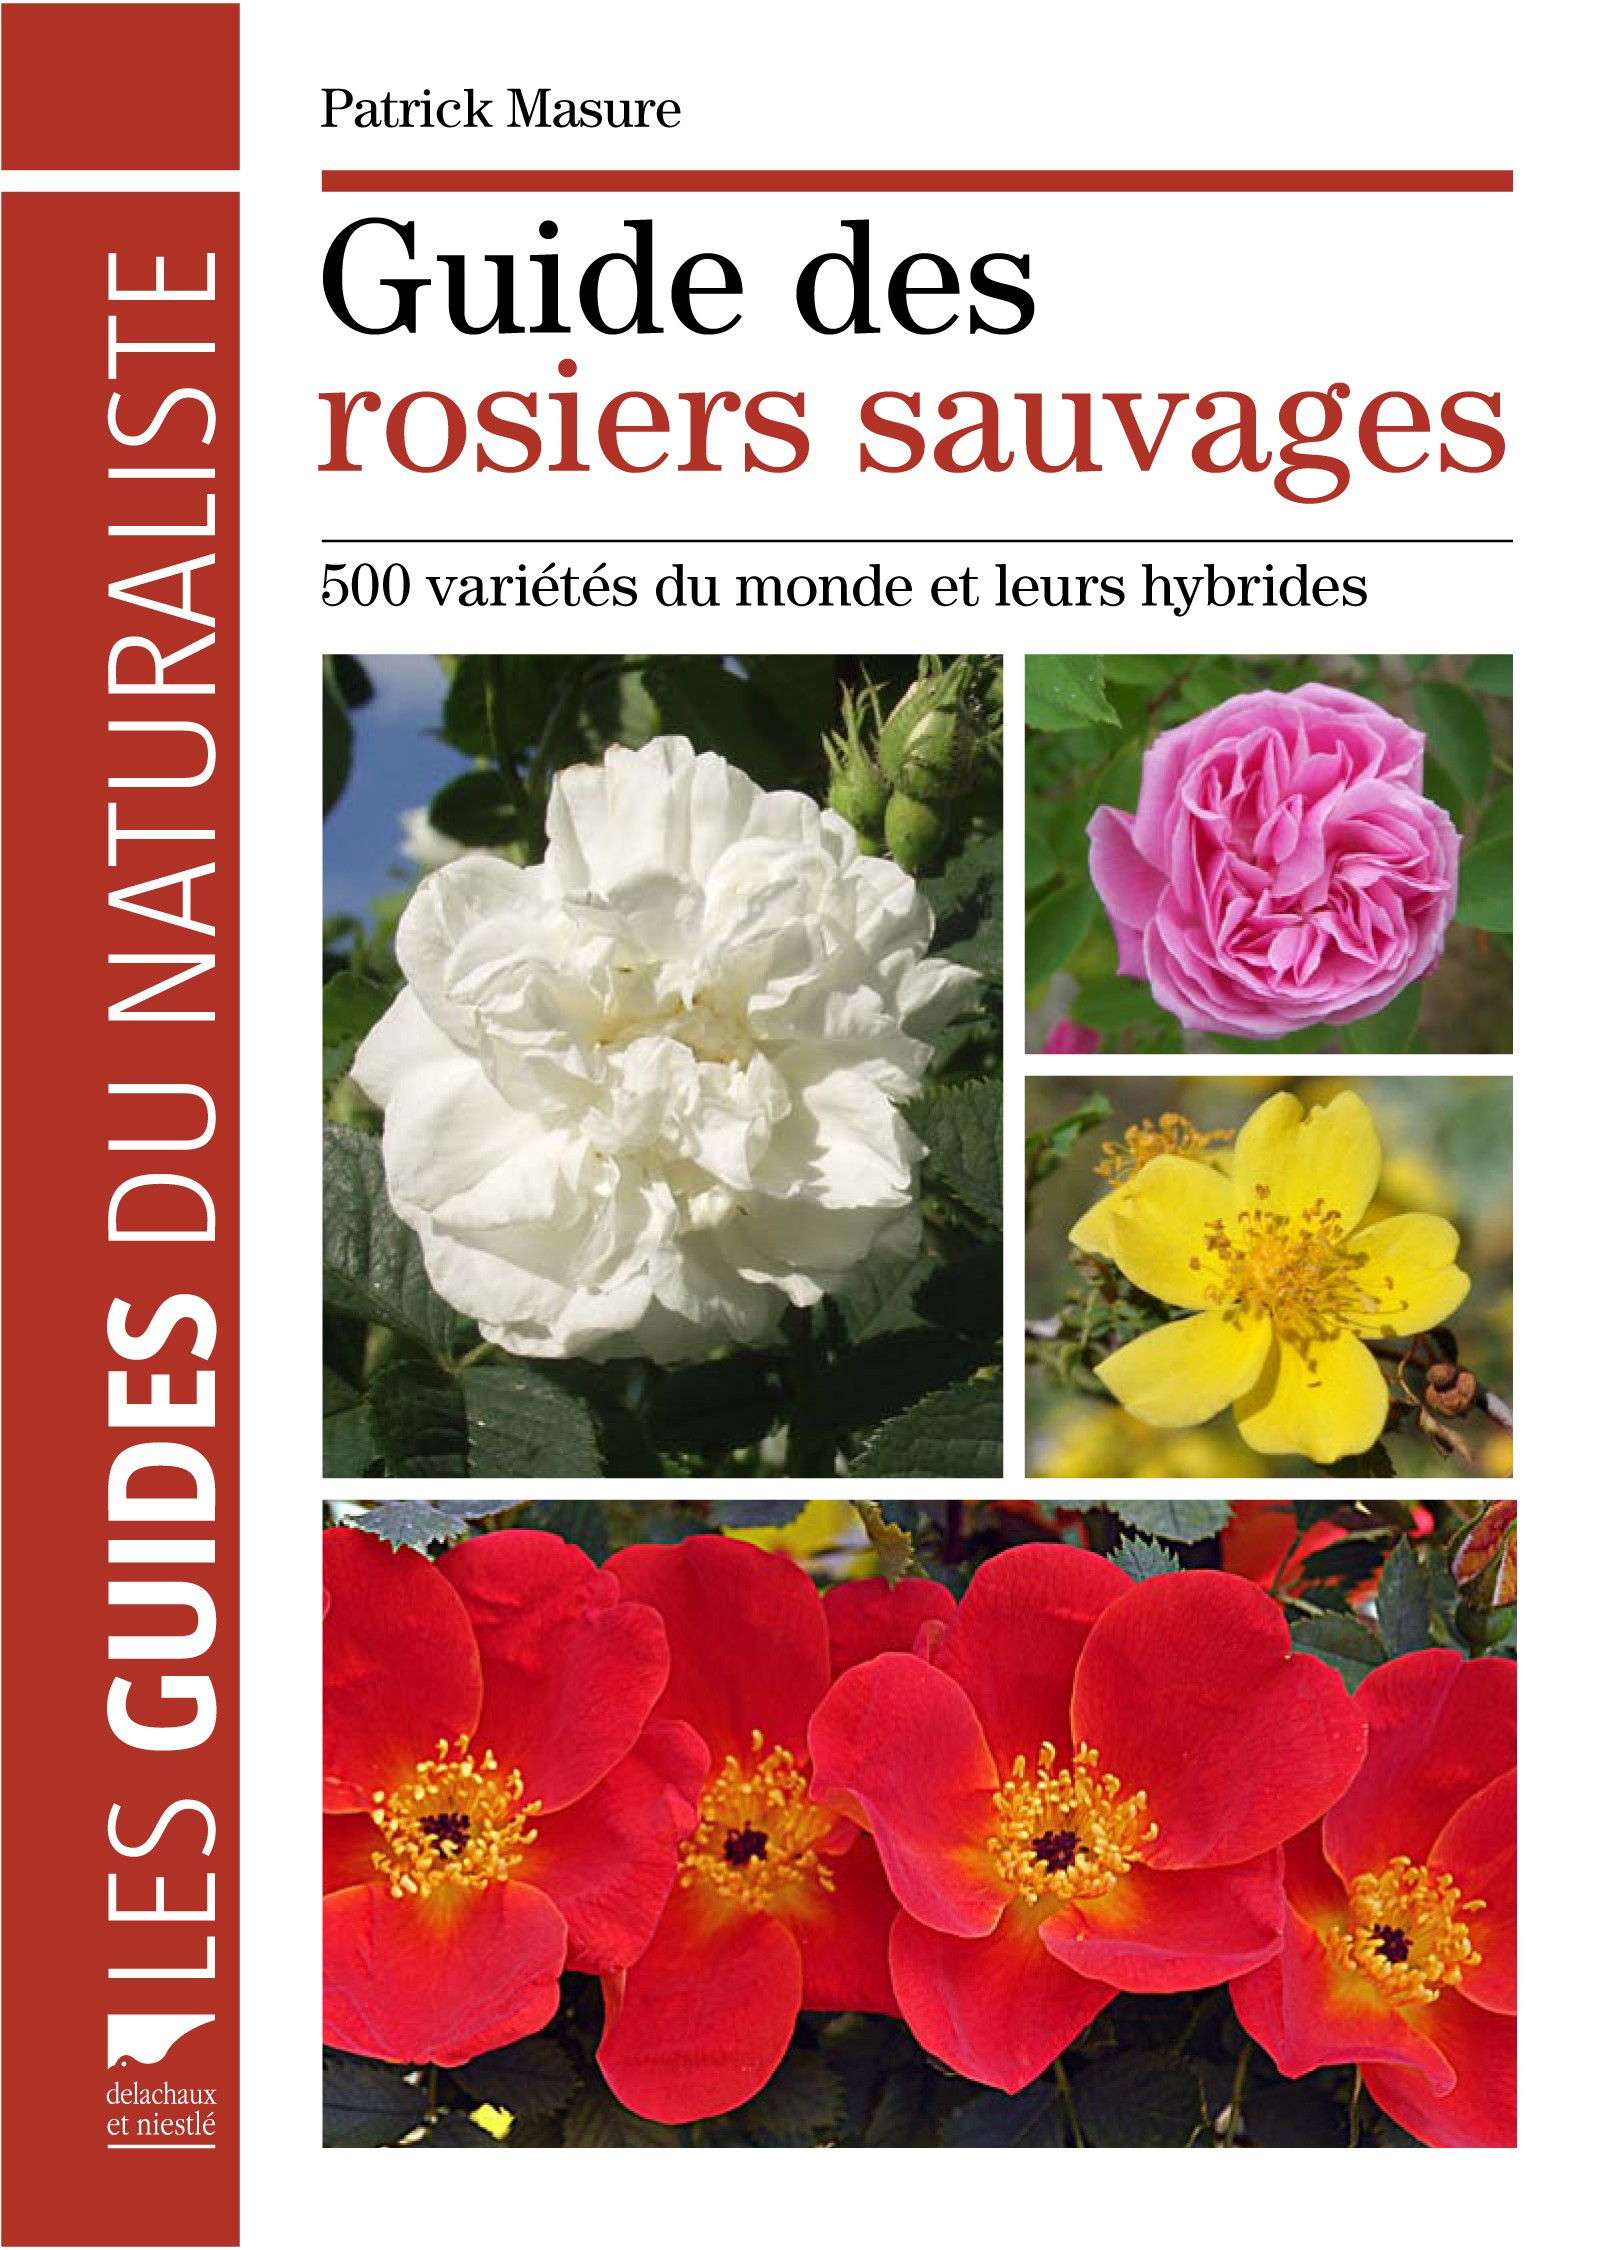 GUIDE DES ROSIERS SAUVAGES